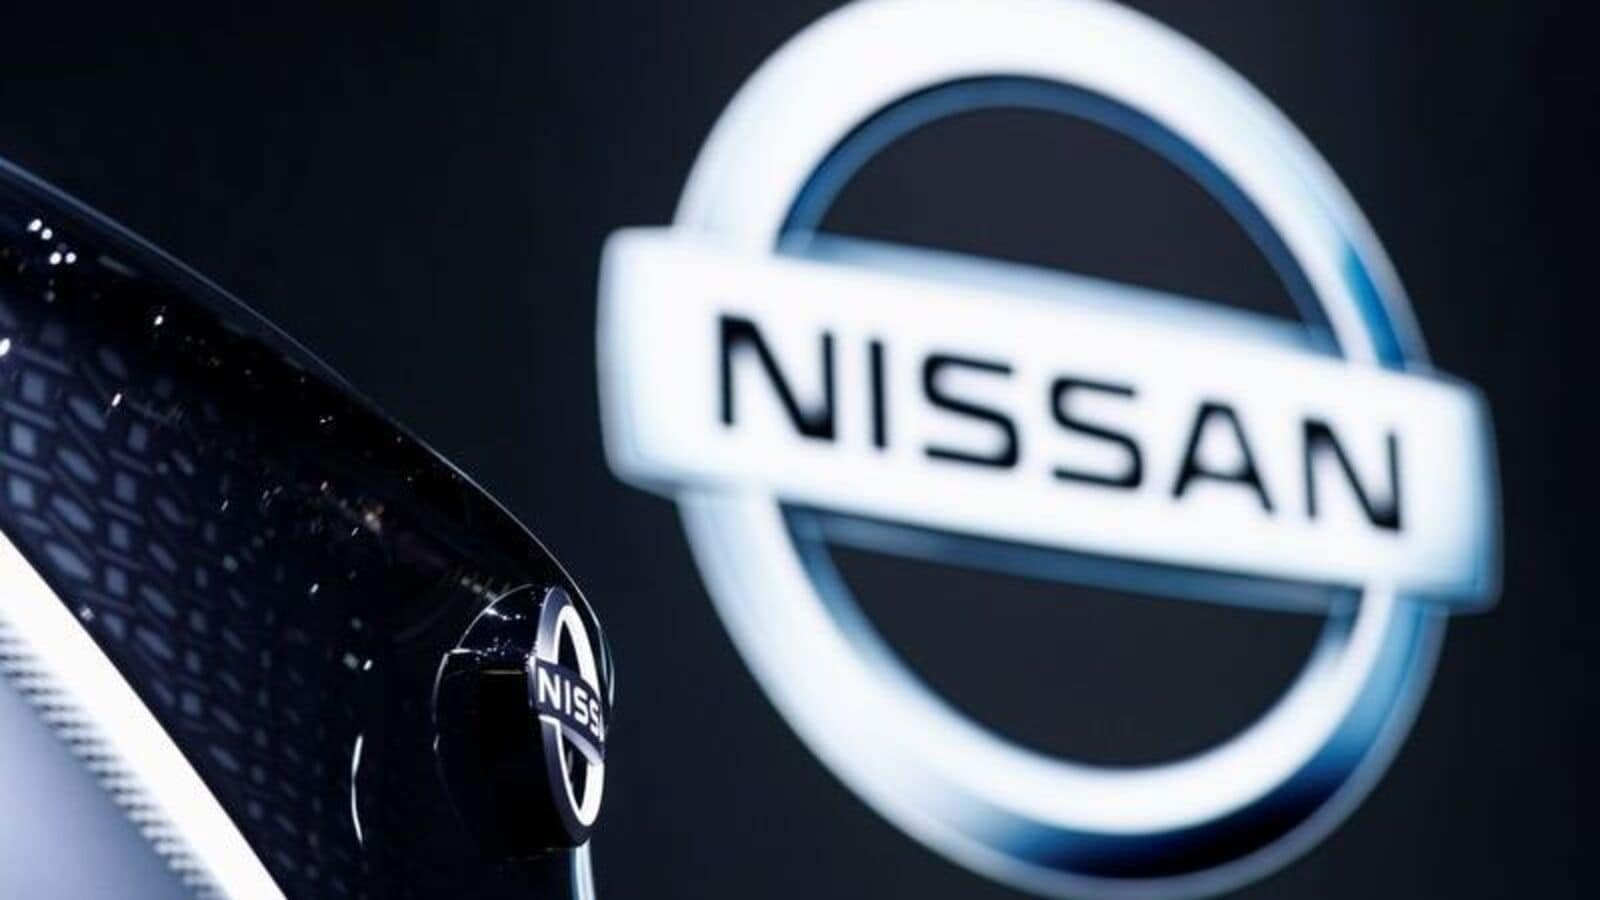 Nissan recalls over 4 lakh cars in US over faulty airbag emblem issue